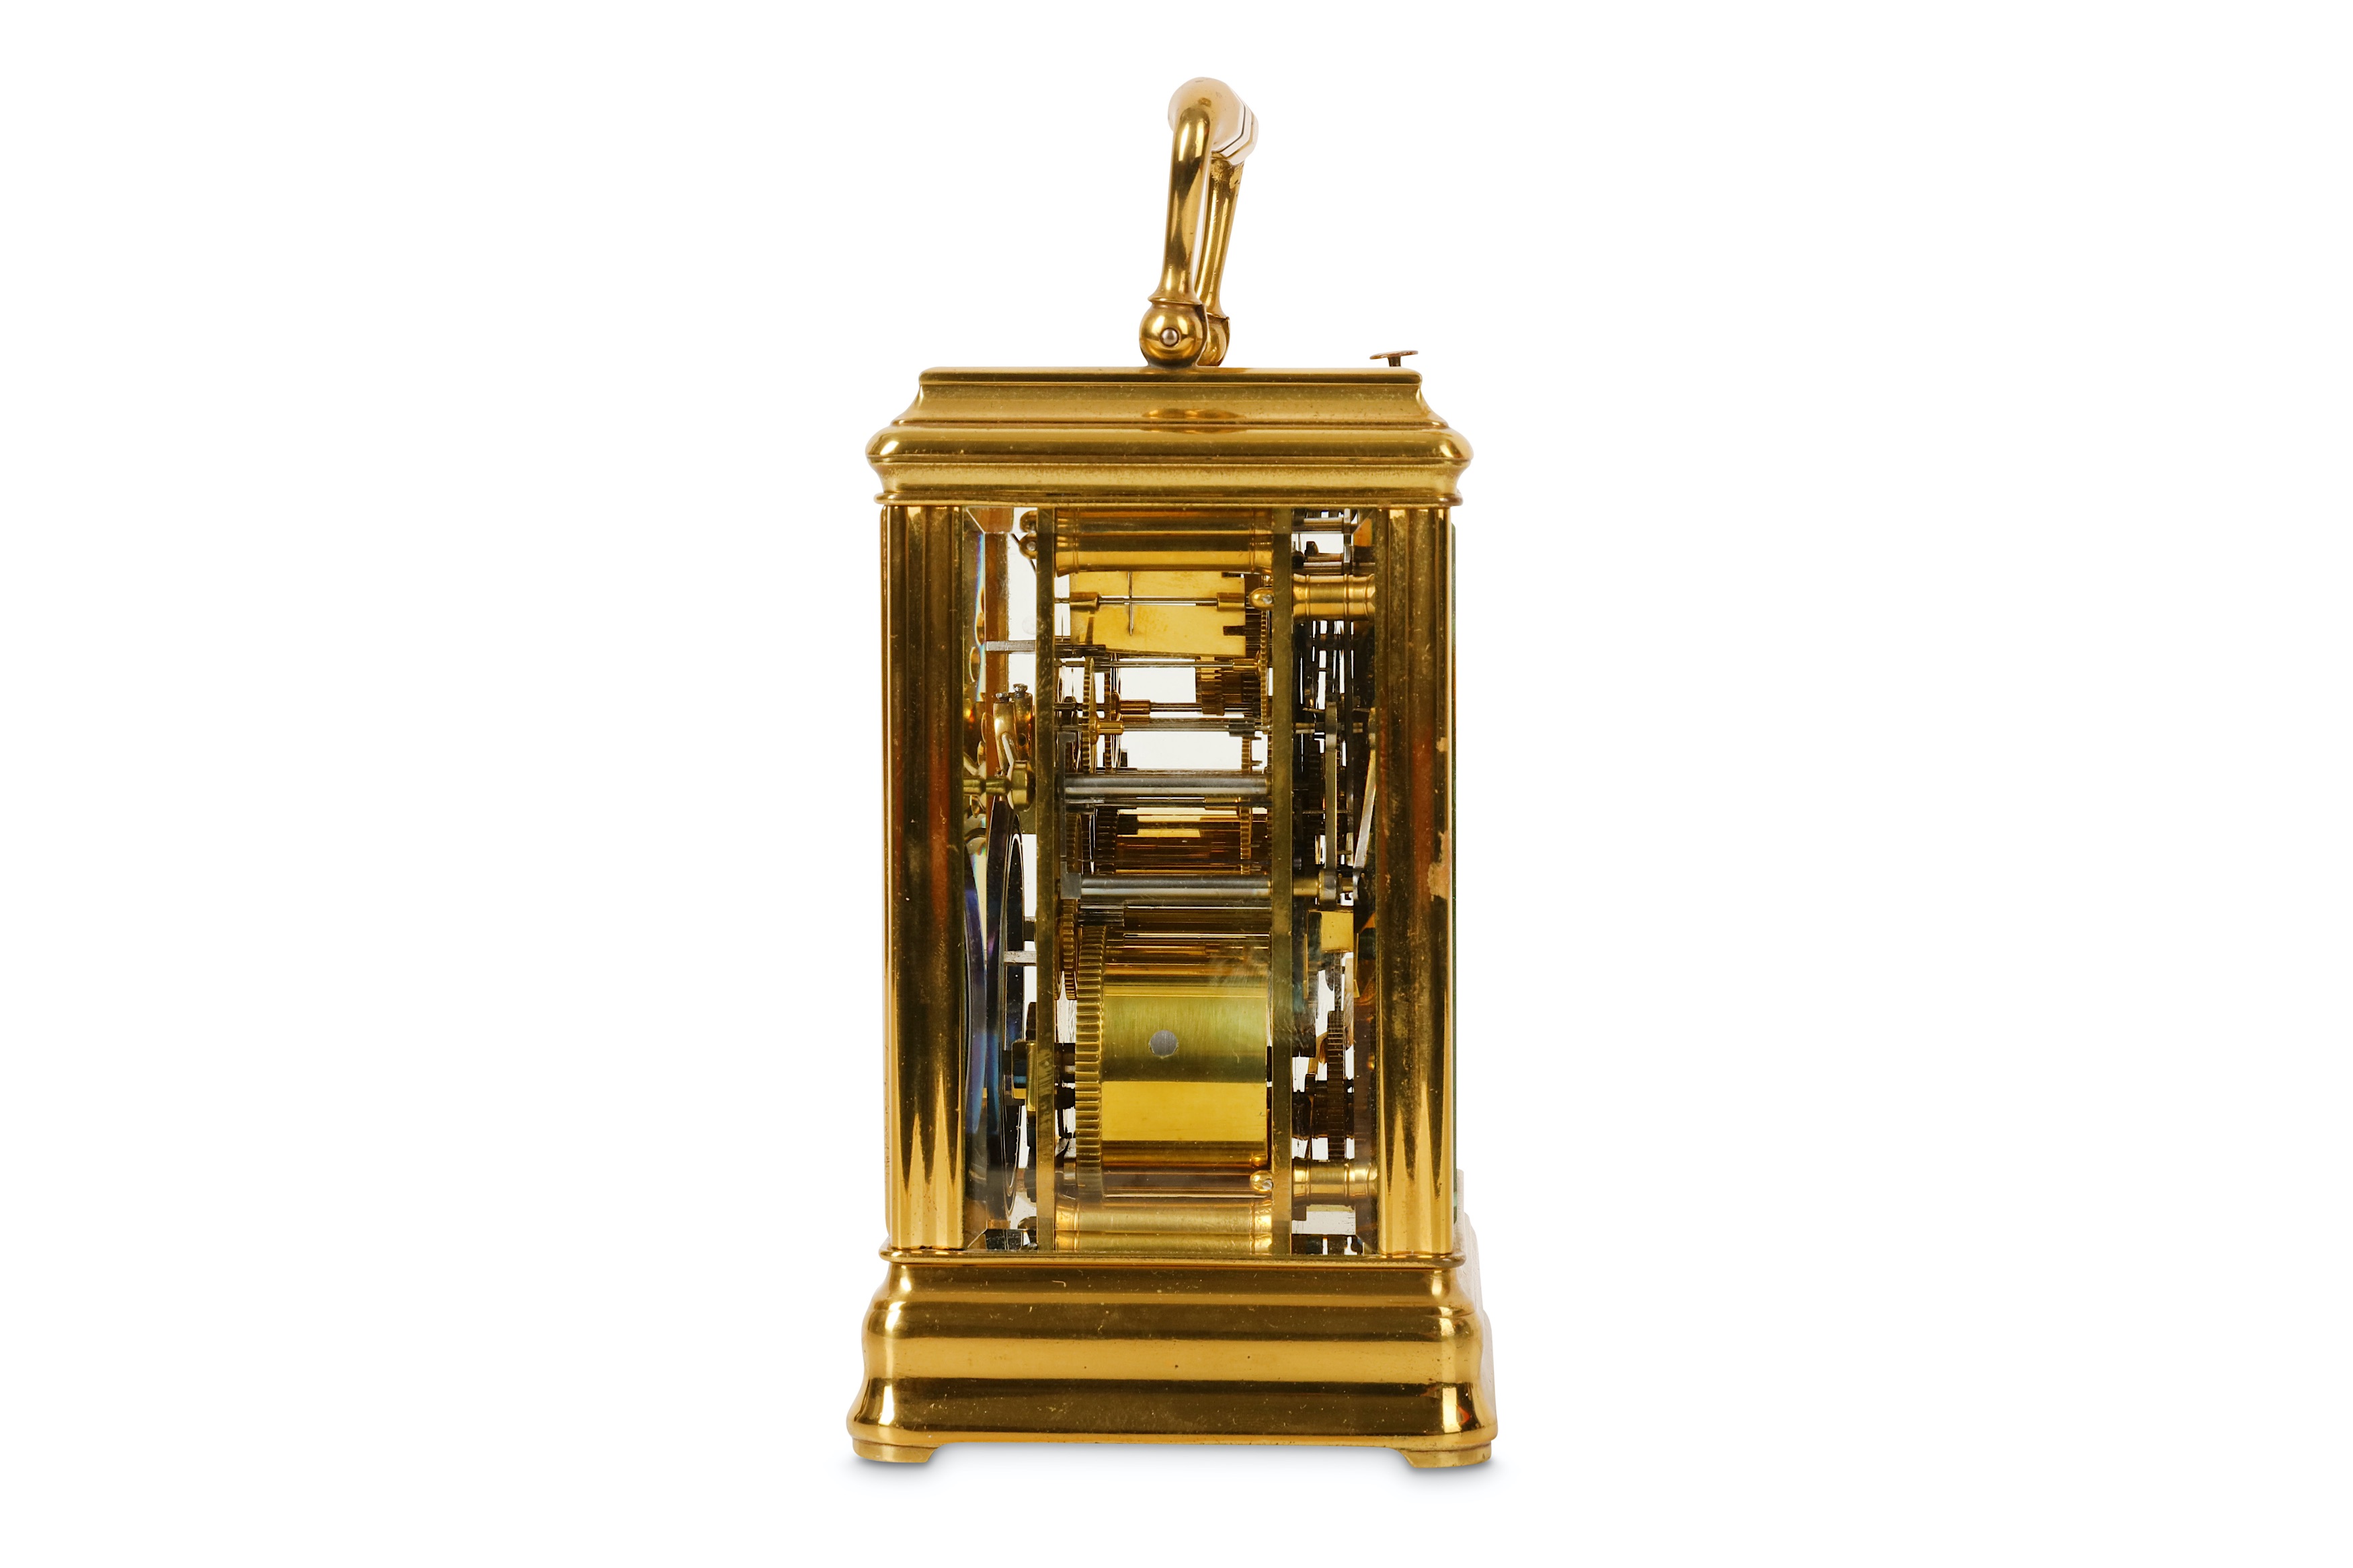 A LATE 19TH CENTURY FRENCH LACQUERED BRASS CARRIAGE CLOCK WITH ALARM AND REPEAT  the gorge case with - Image 2 of 5